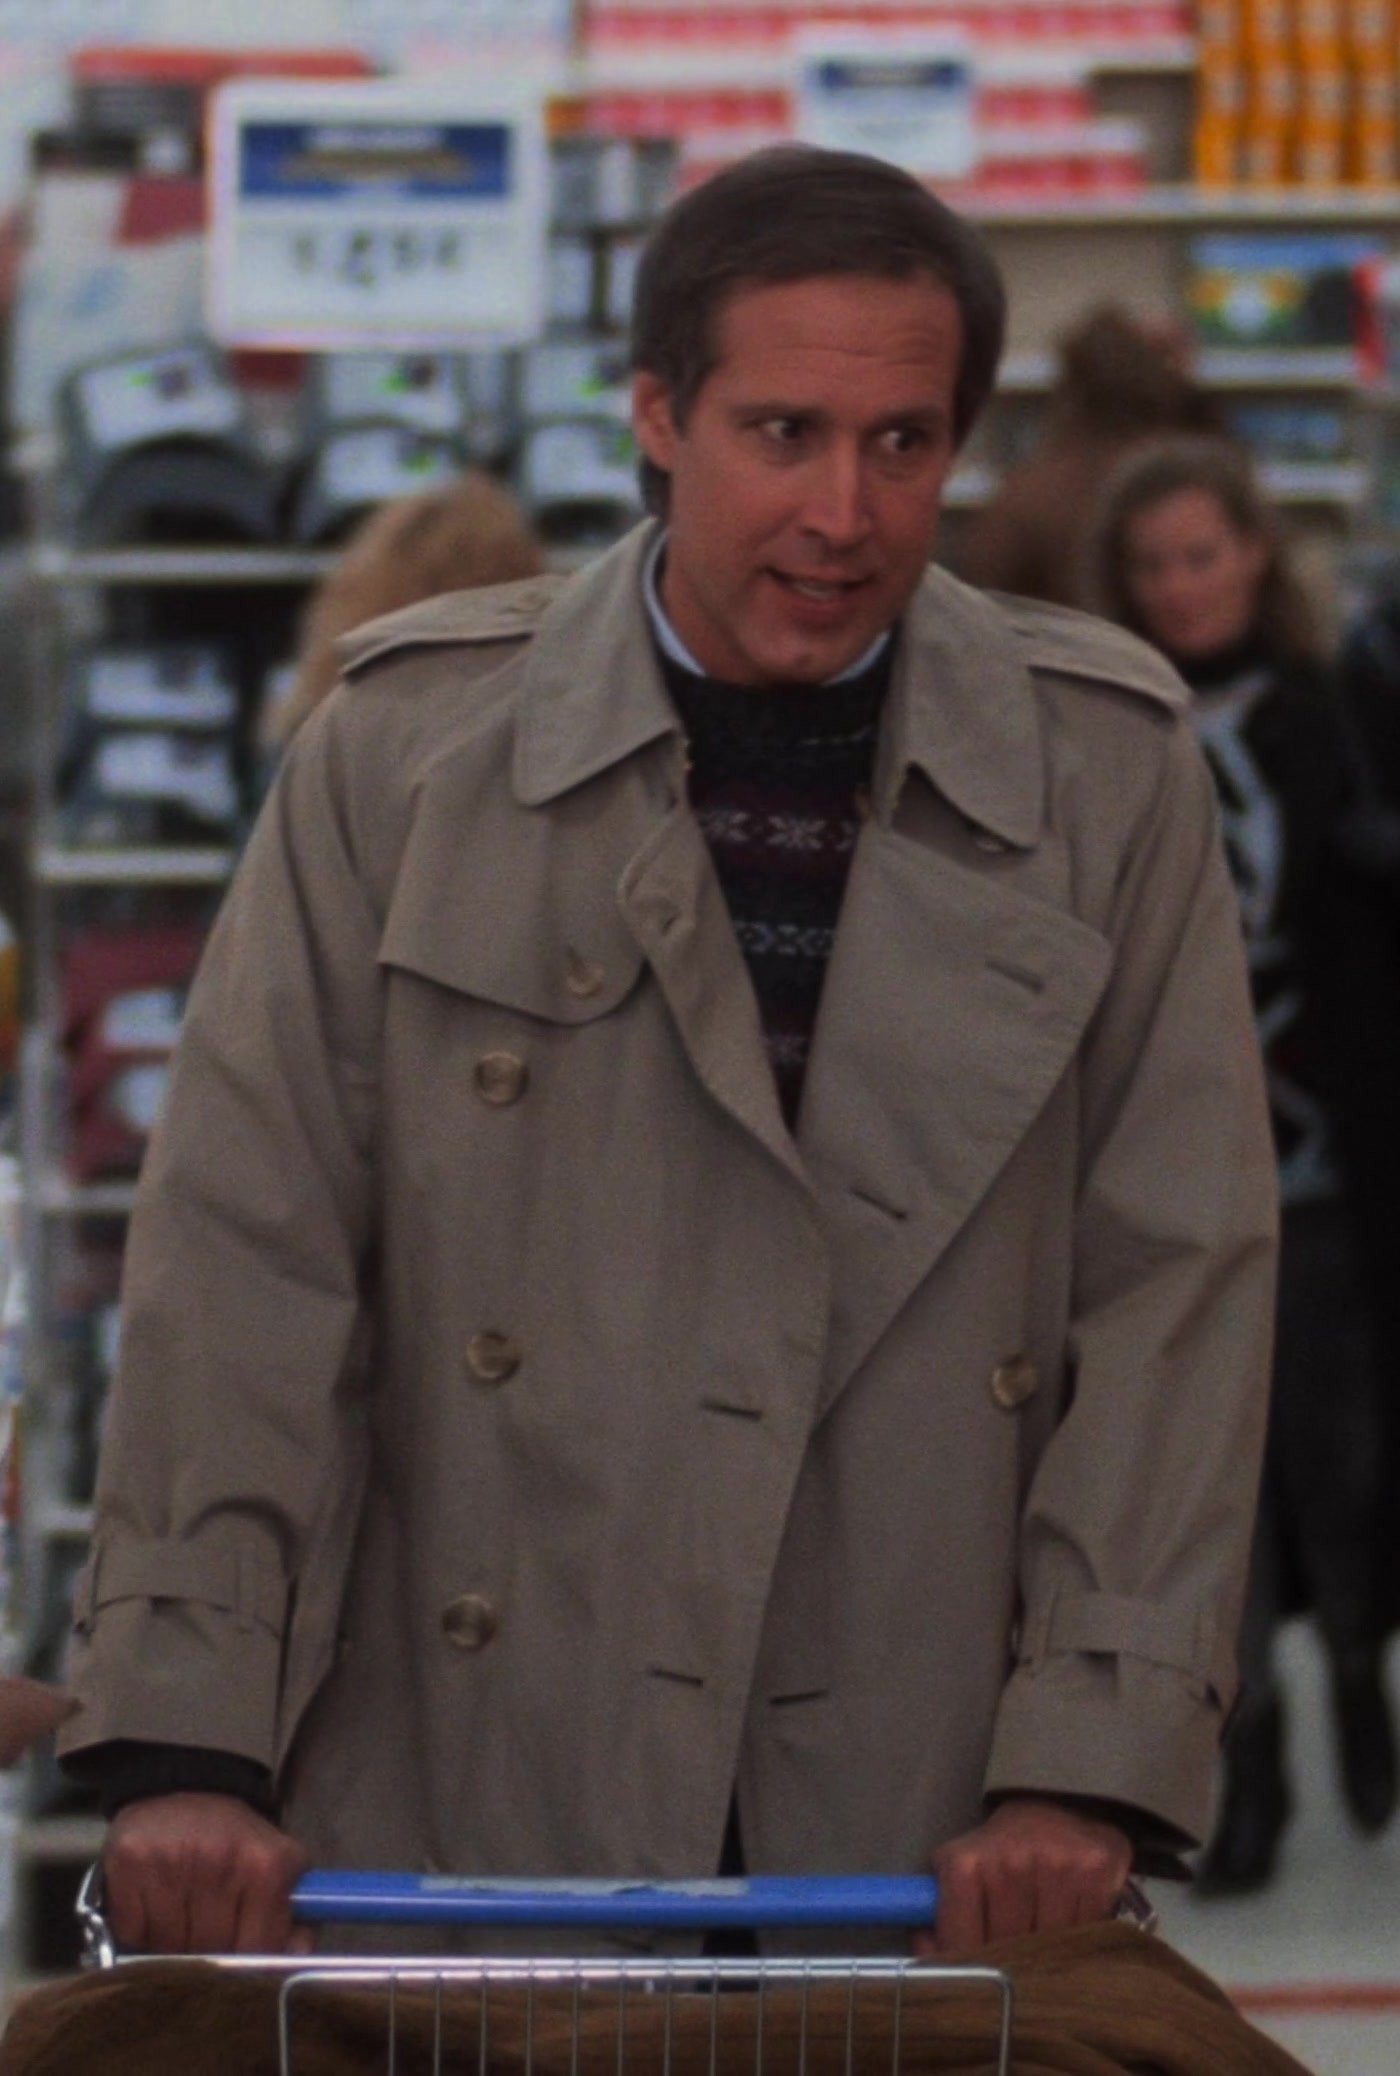 Worn on National Lampoon's Christmas Vacation (1989) Movie - Classic Double-Breasted Trench Coat of Chevy Chase as Clark W. "Sparky" Griswold Jr.